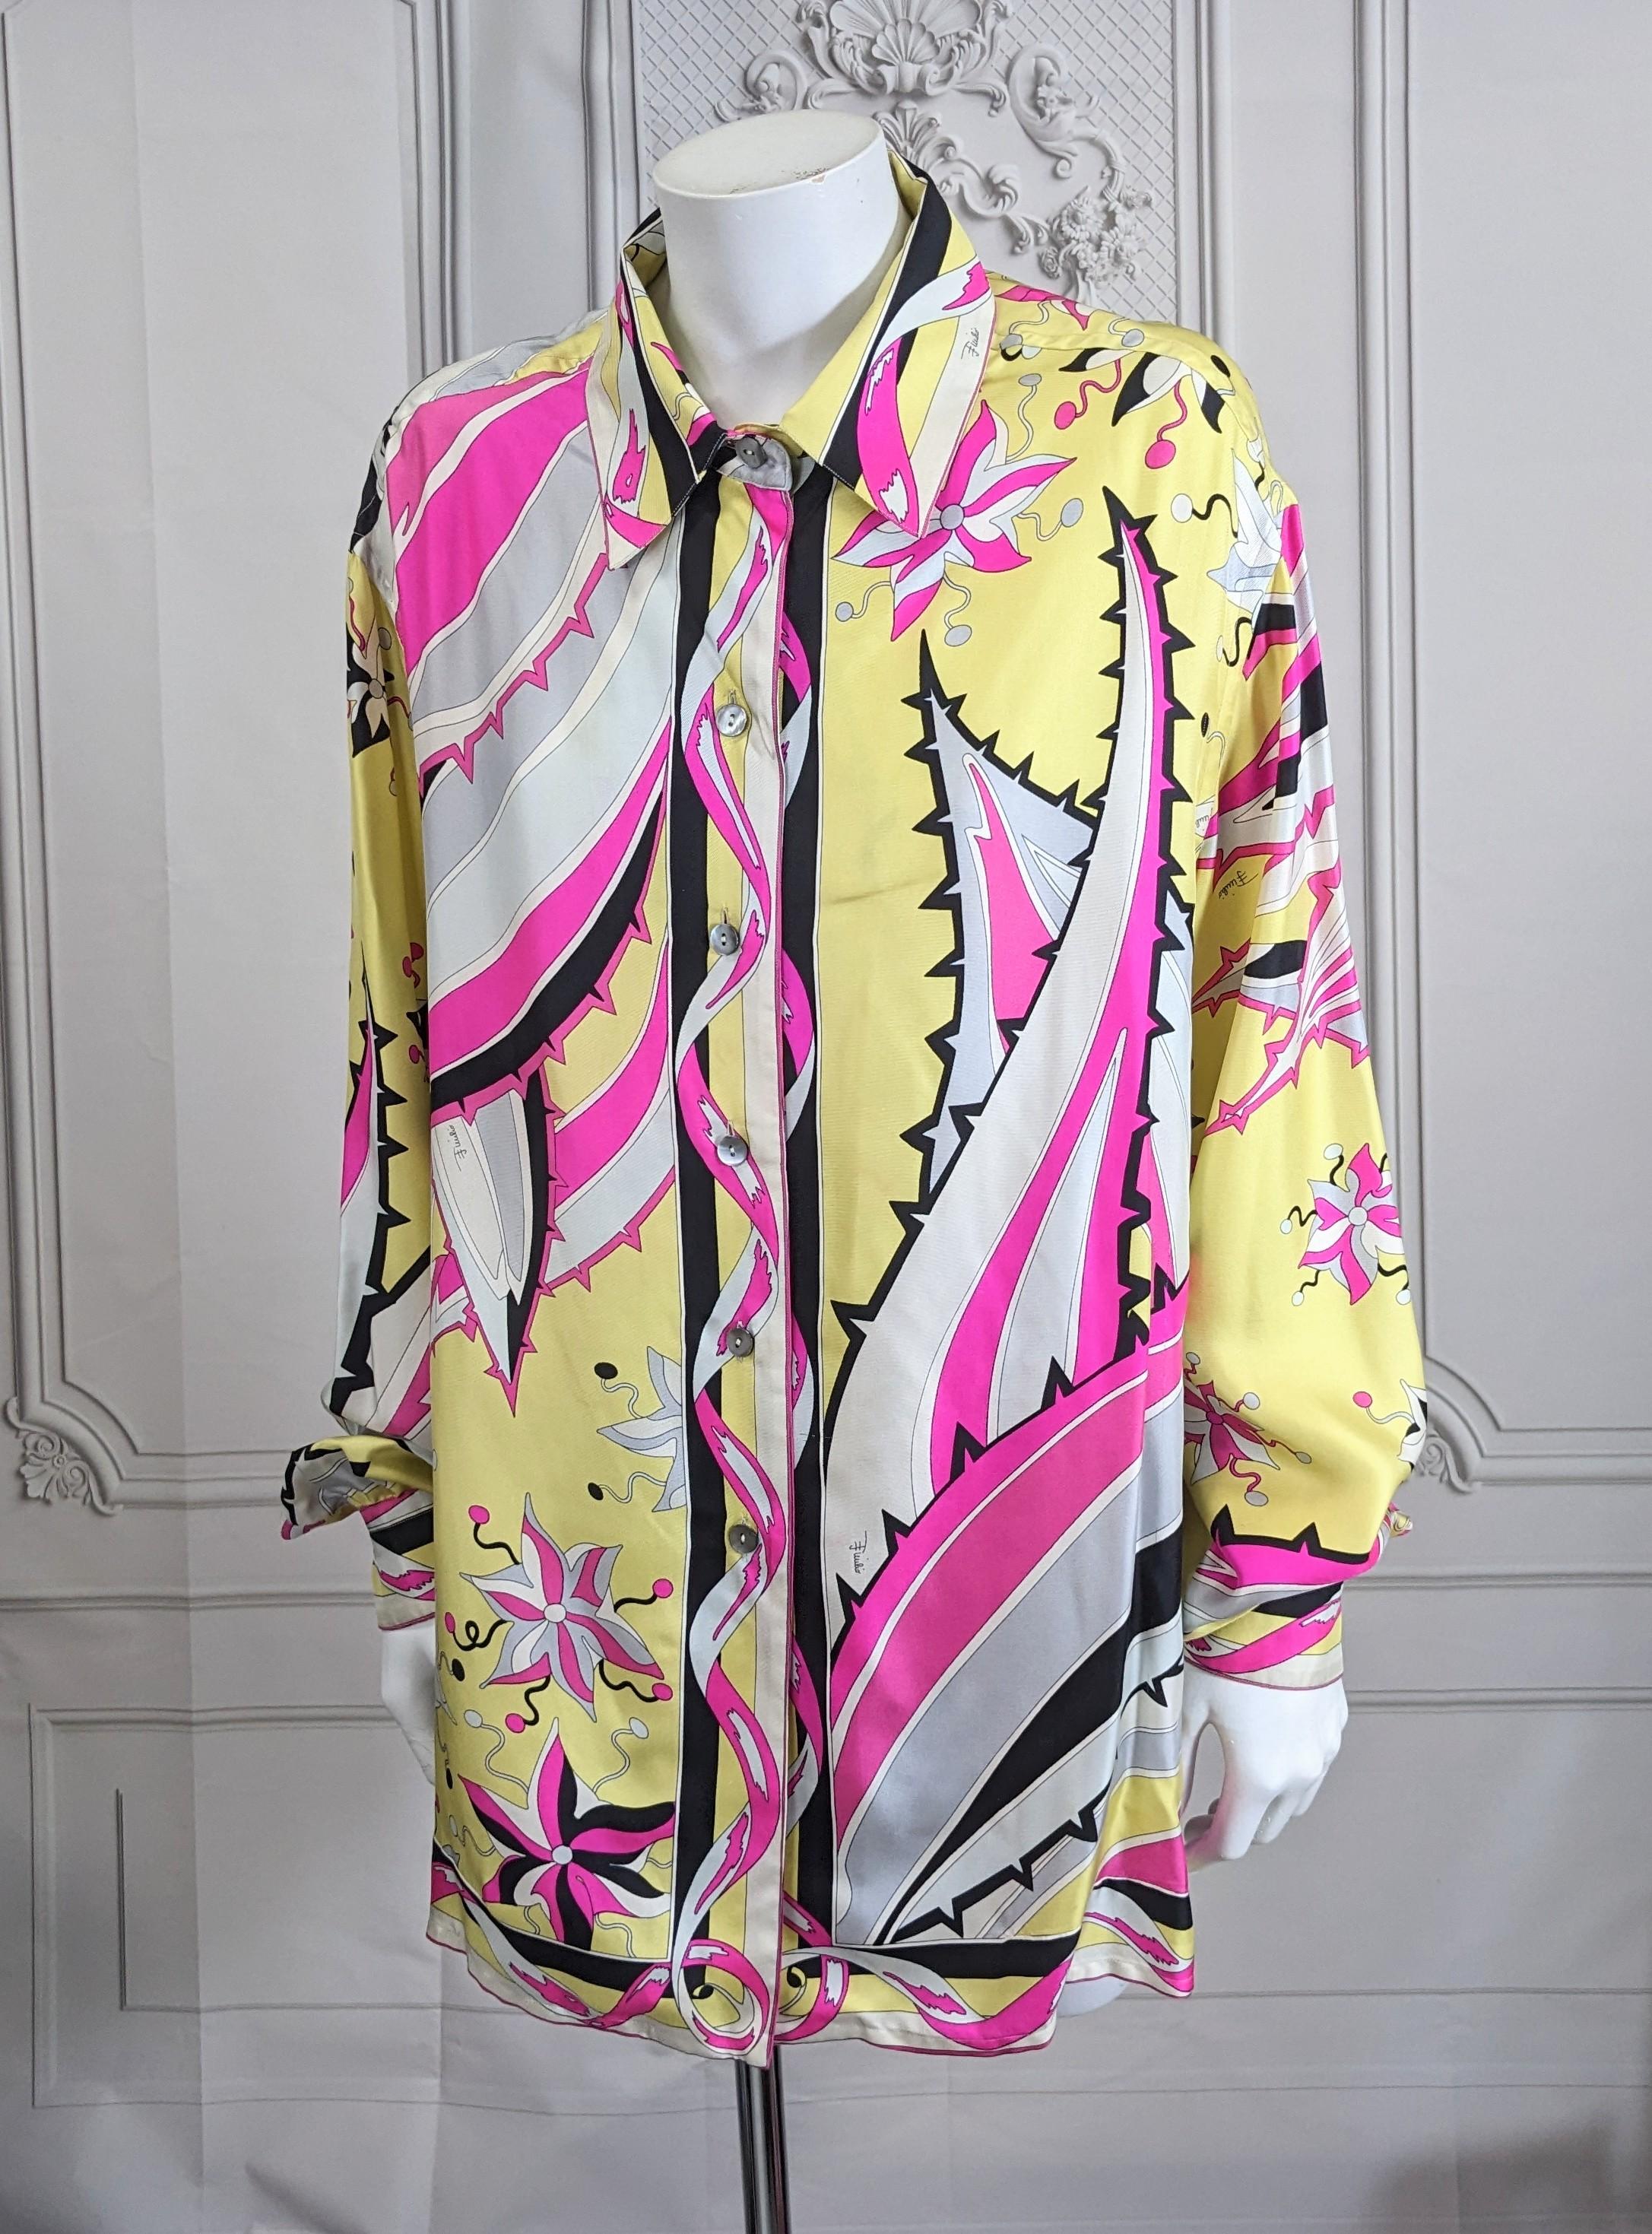 Oversized Pucci Silk Twill Print Shirt in super colored pop patterns suitable for men or women.  1990's Italy.  Size 40
Pls contact x exact measurements.